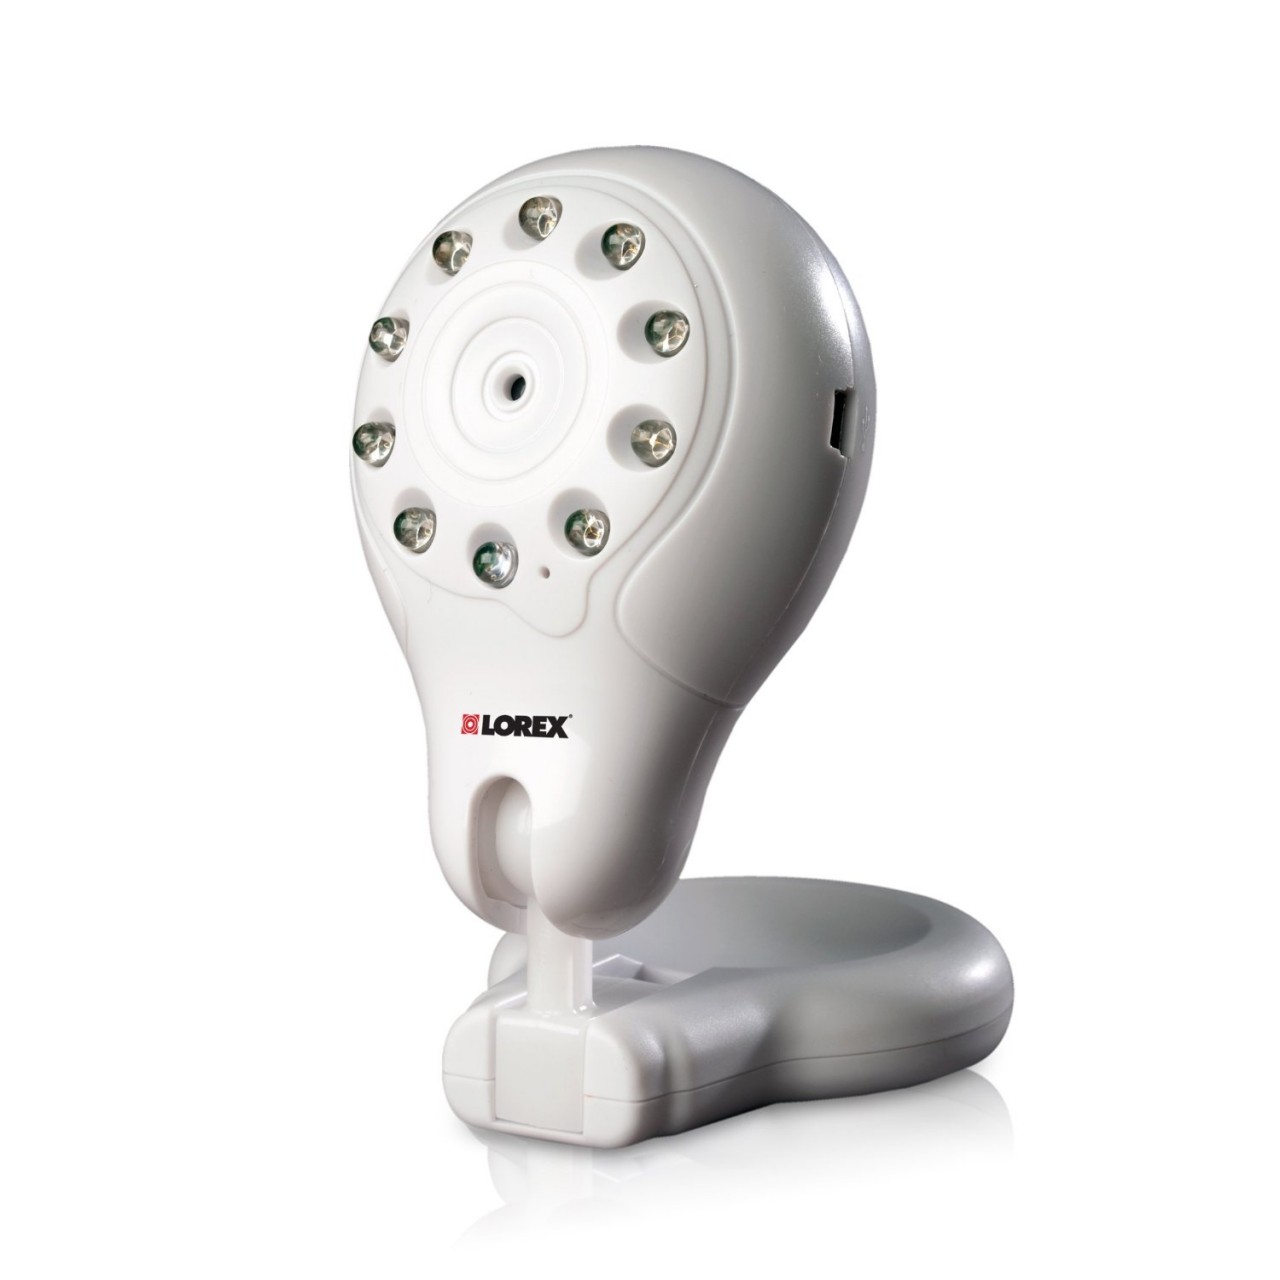 LIVE Snap Baby Monitor Add-on Camera